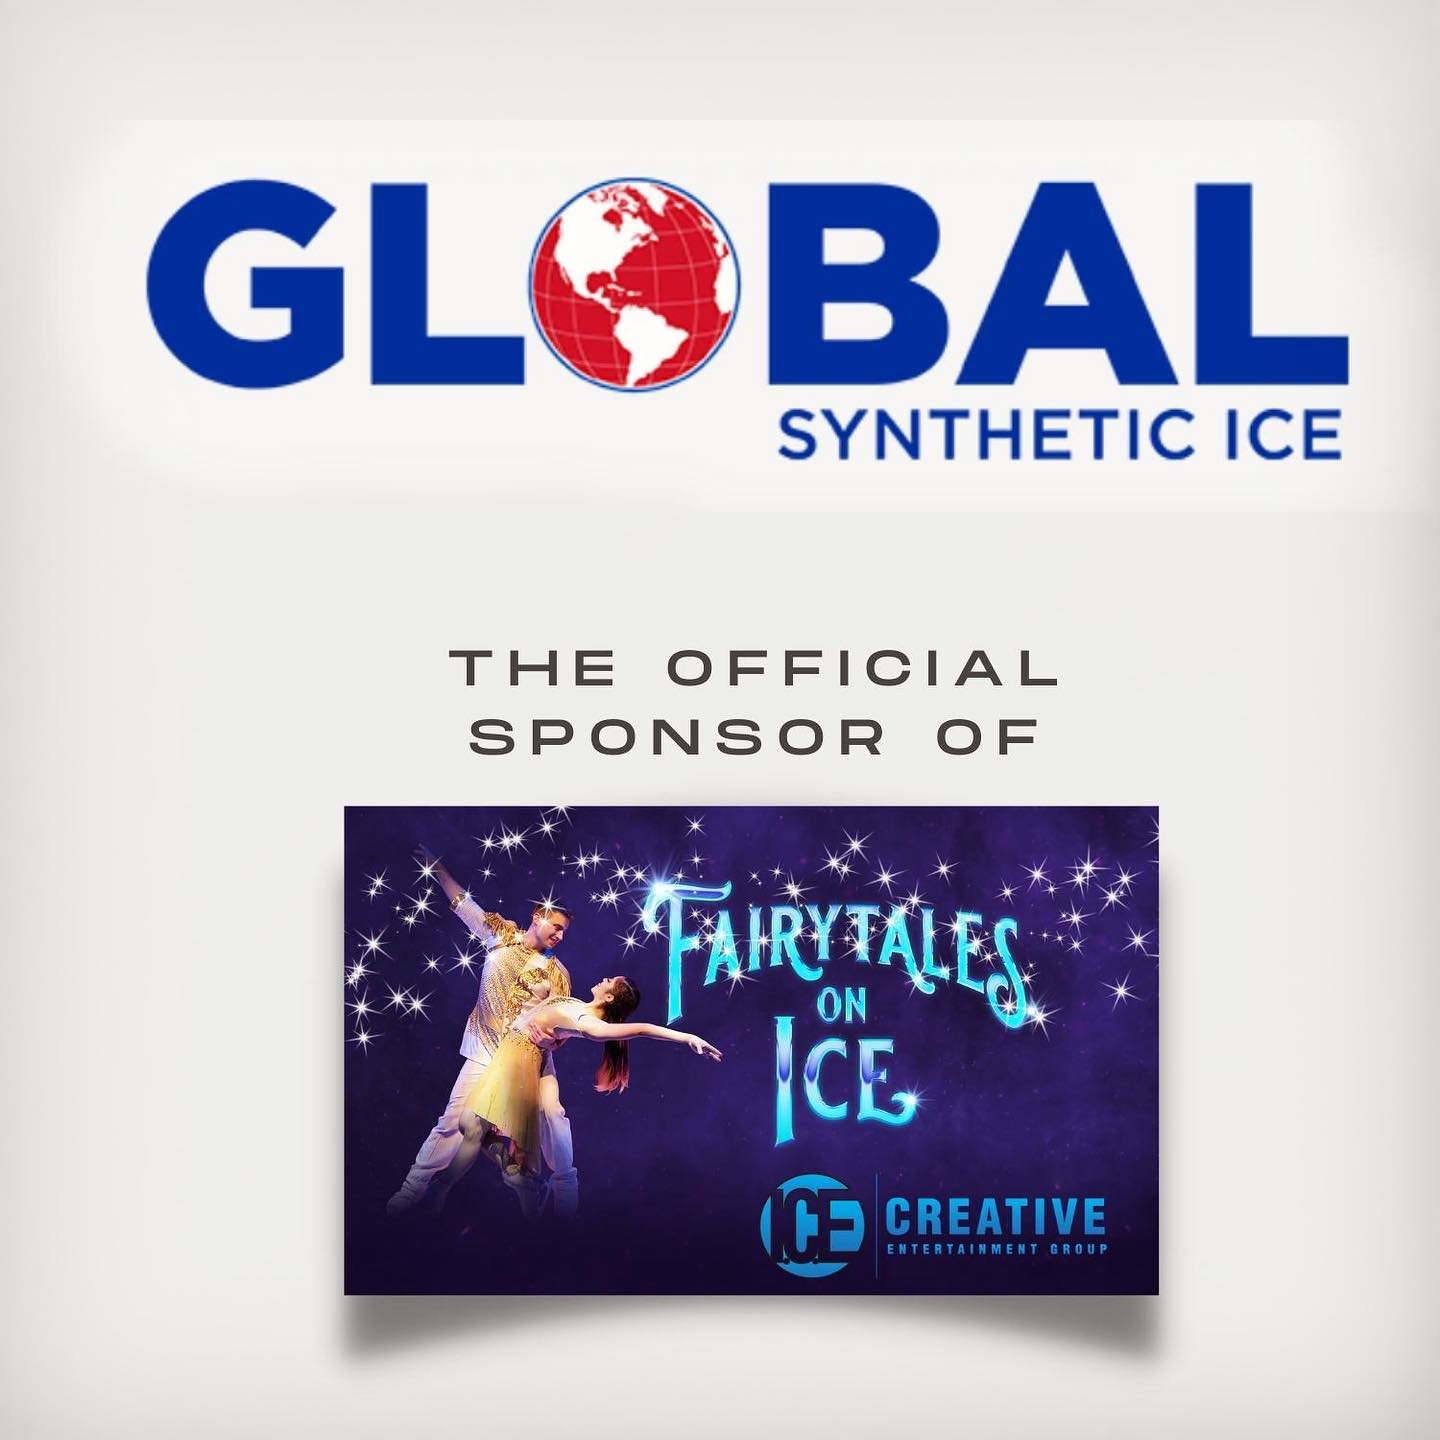 Global Synthetic Ice is the official Sponsor of ICE